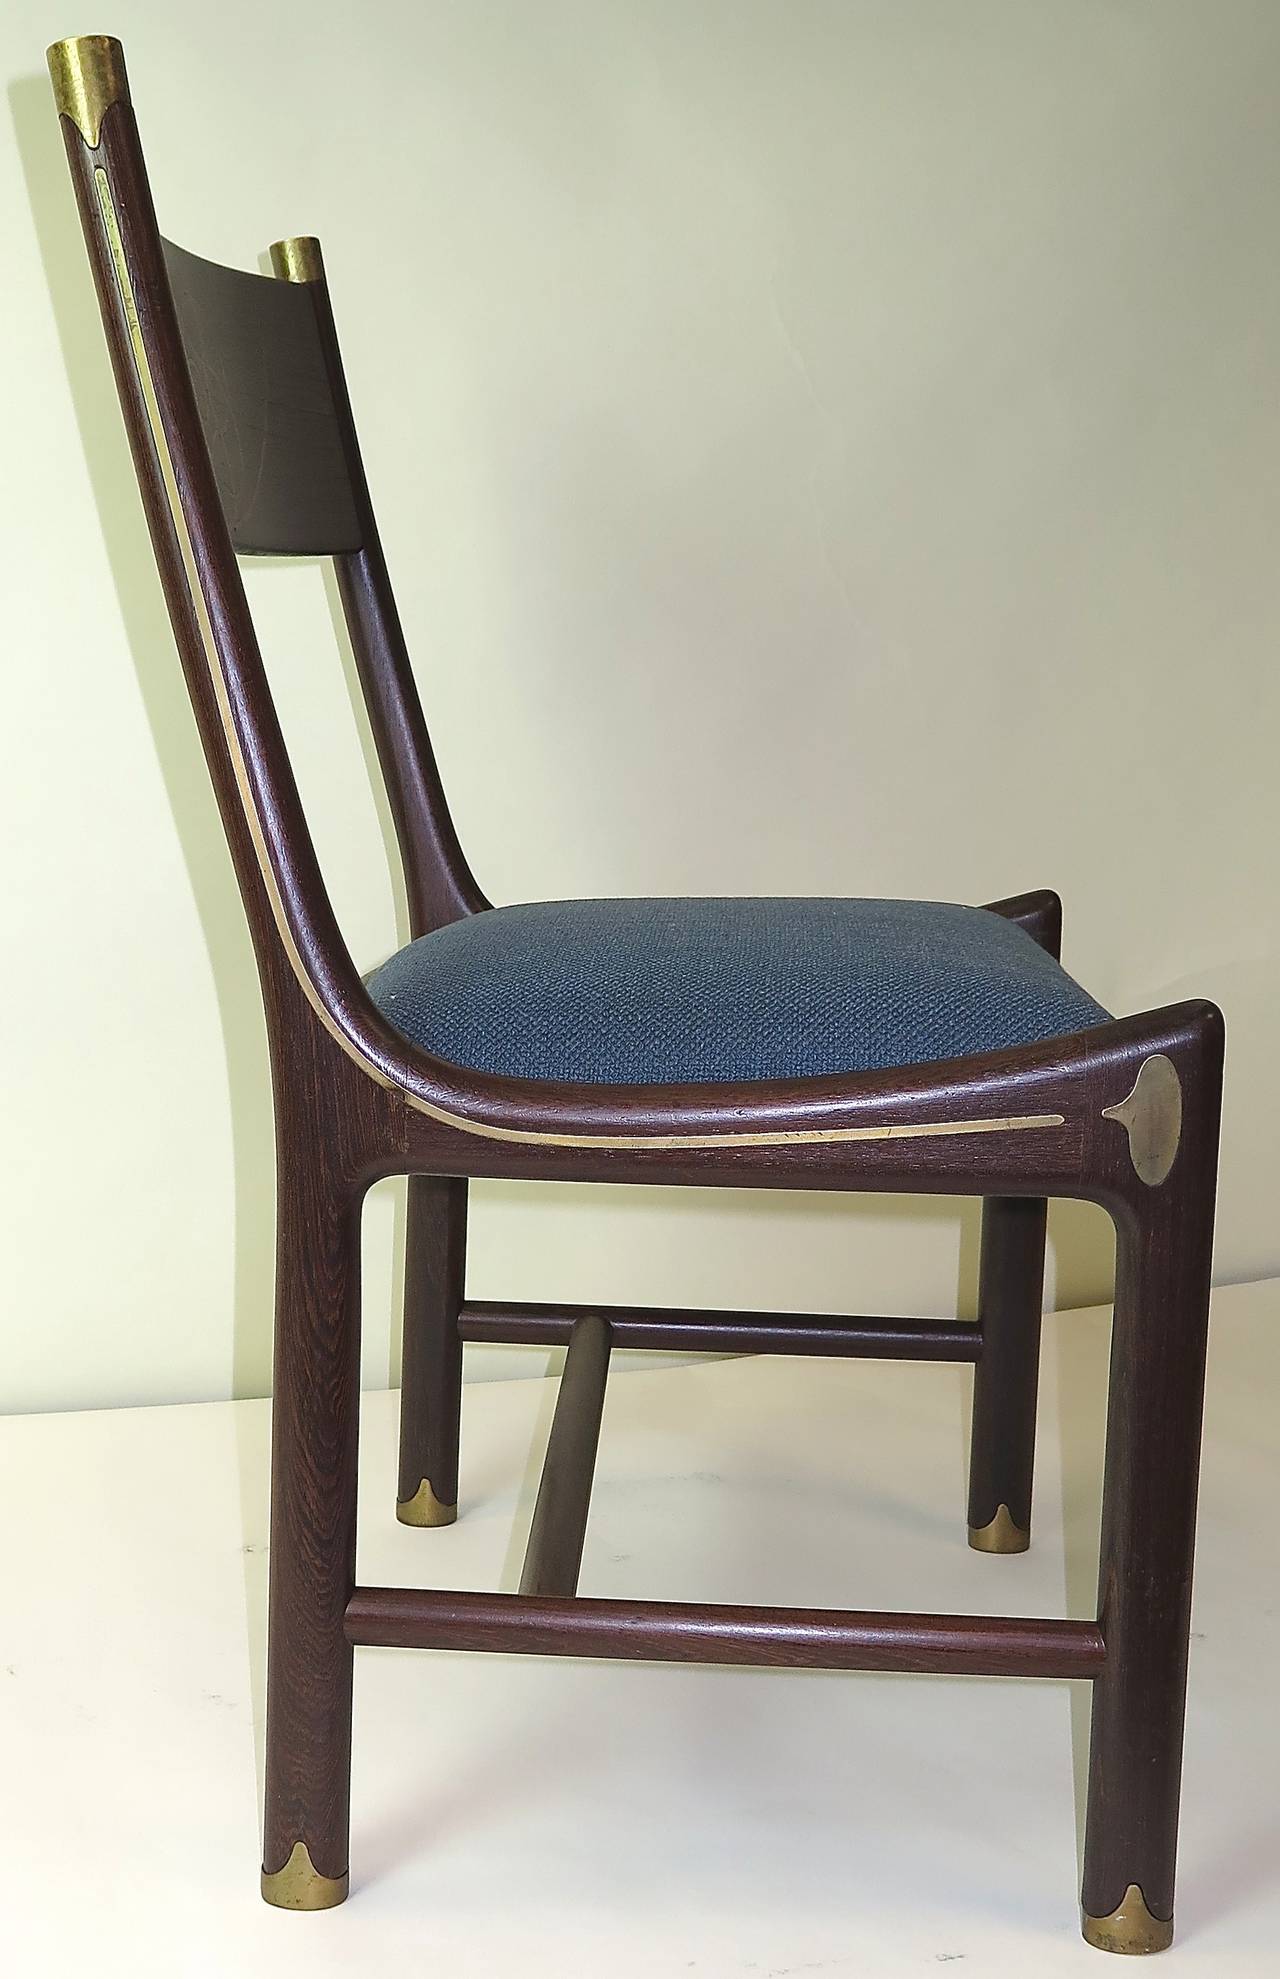  1970 Pair of Ib Kofod-Larsen for Selig Chairs In Excellent Condition For Sale In Hudson, NY